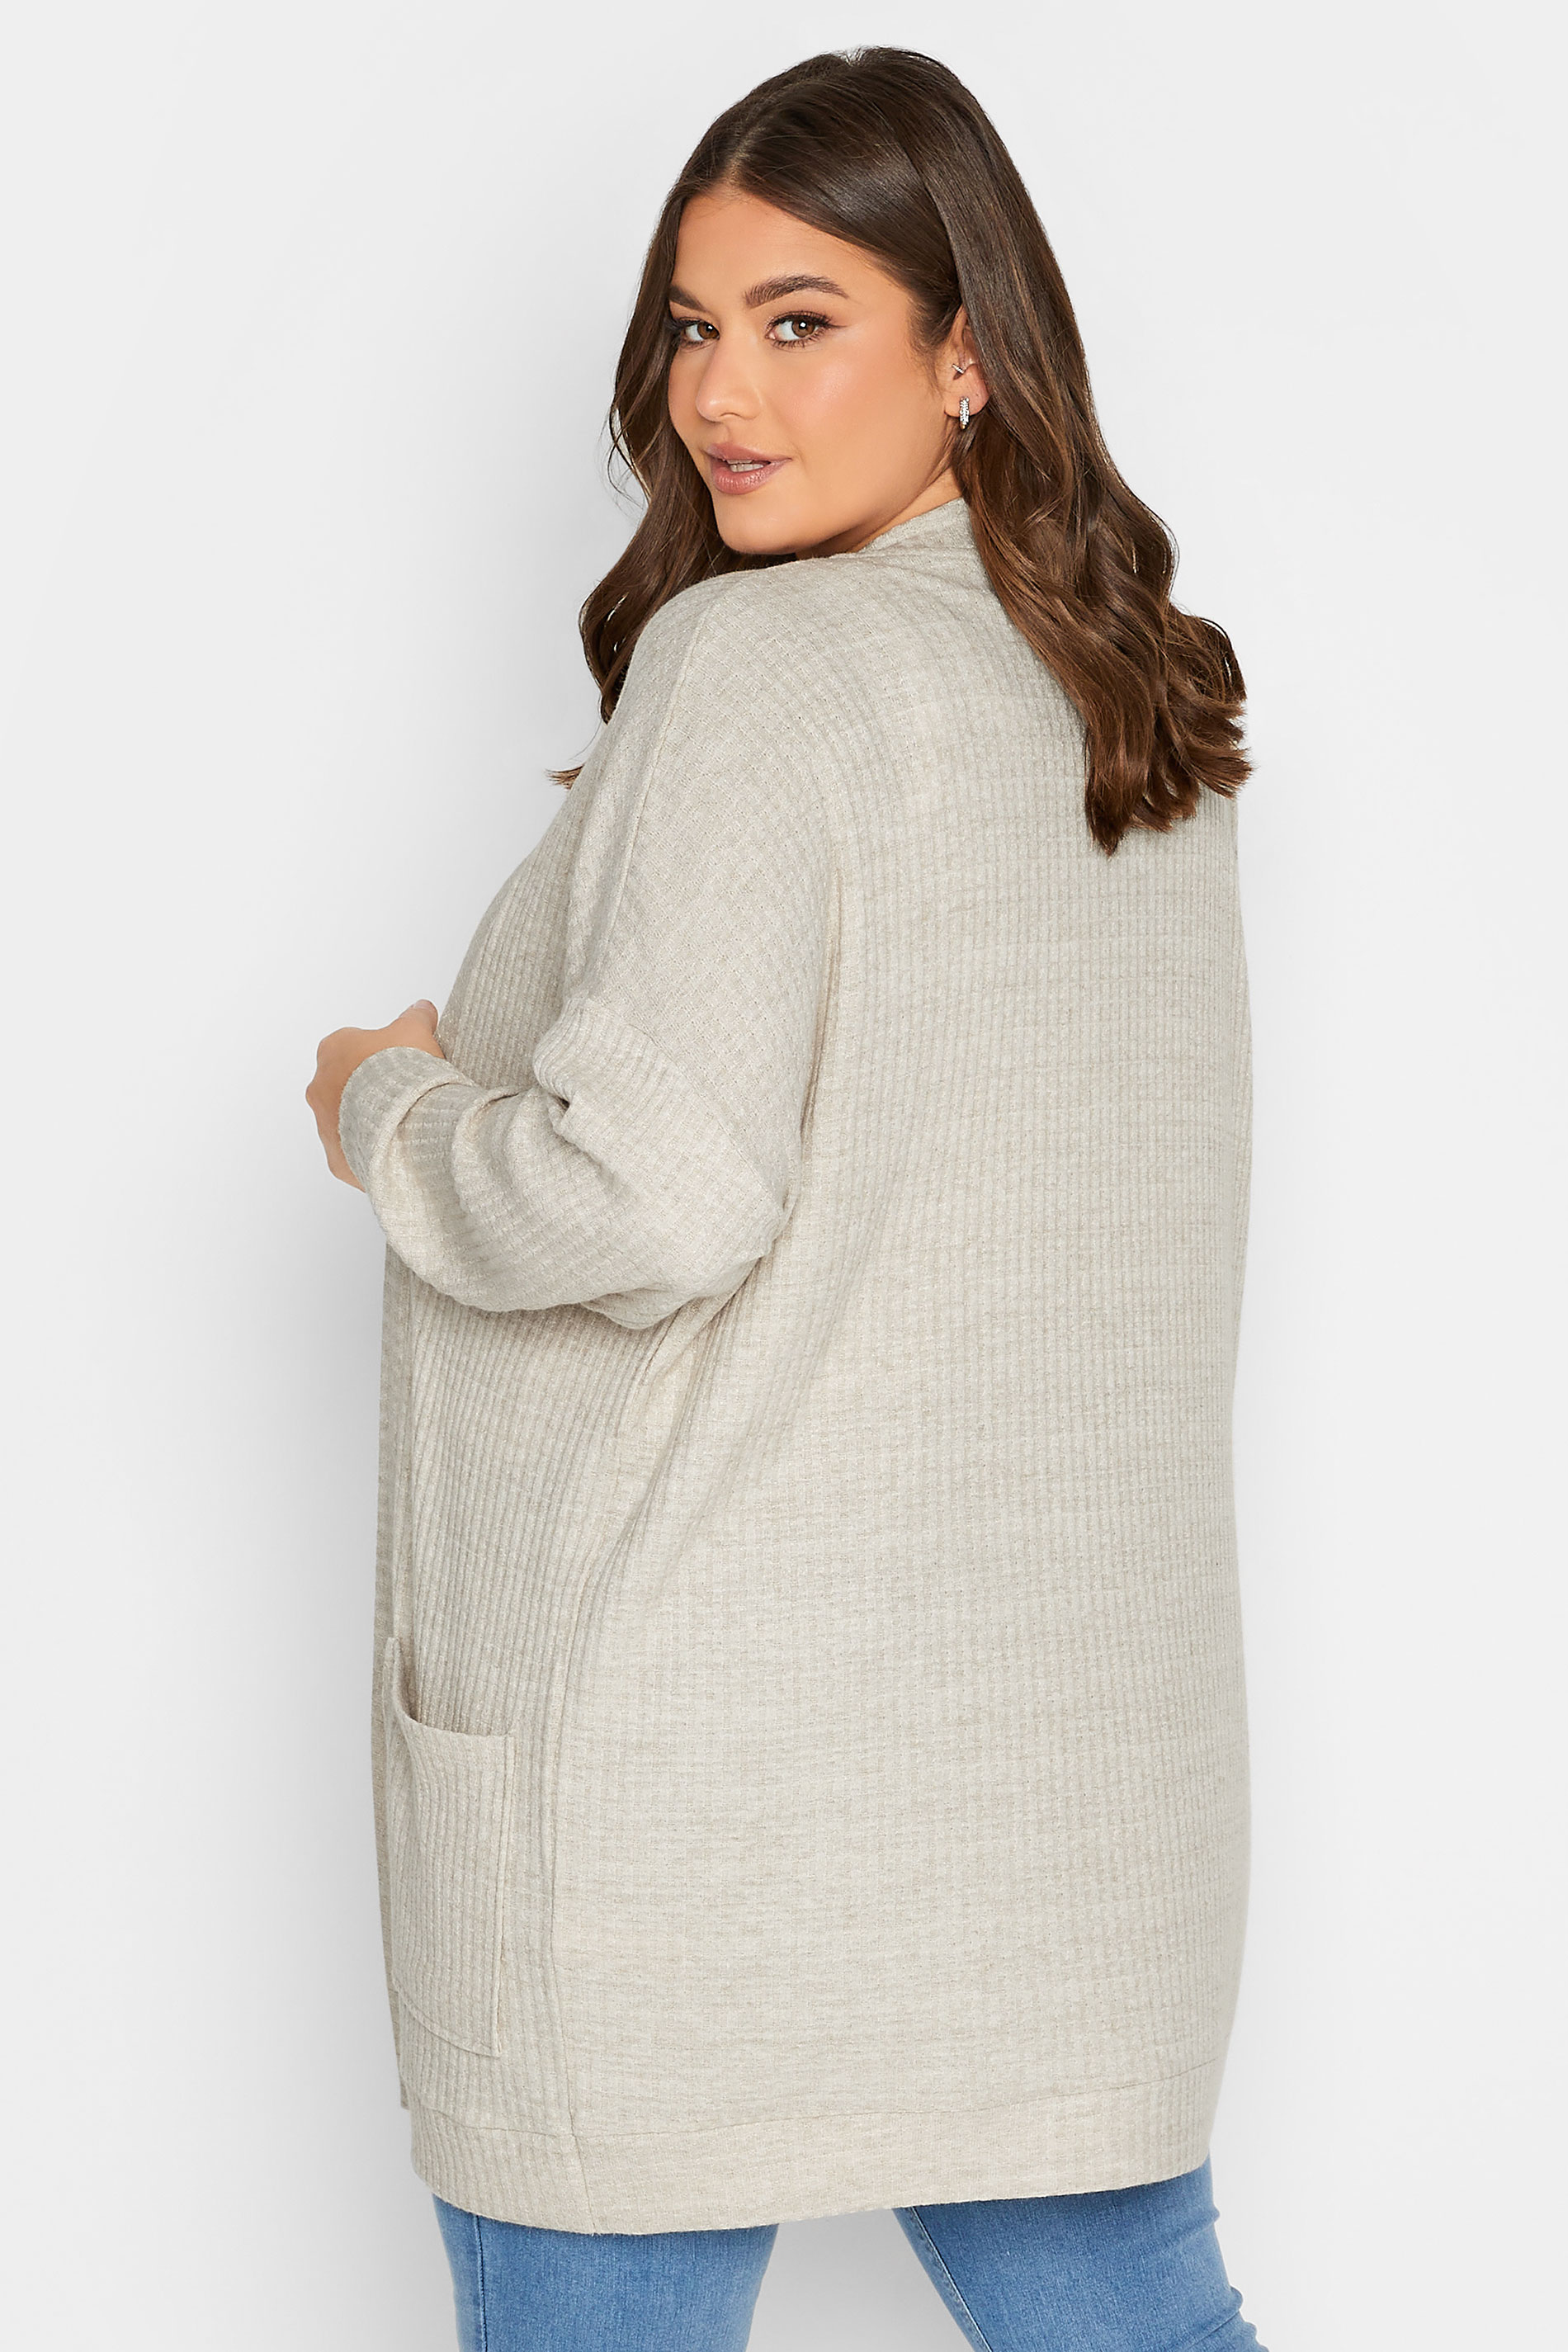 arsenal mærkning industri YOURS Plus Size Cream Ribbed Soft Touch Cardigan | Yours Clothing